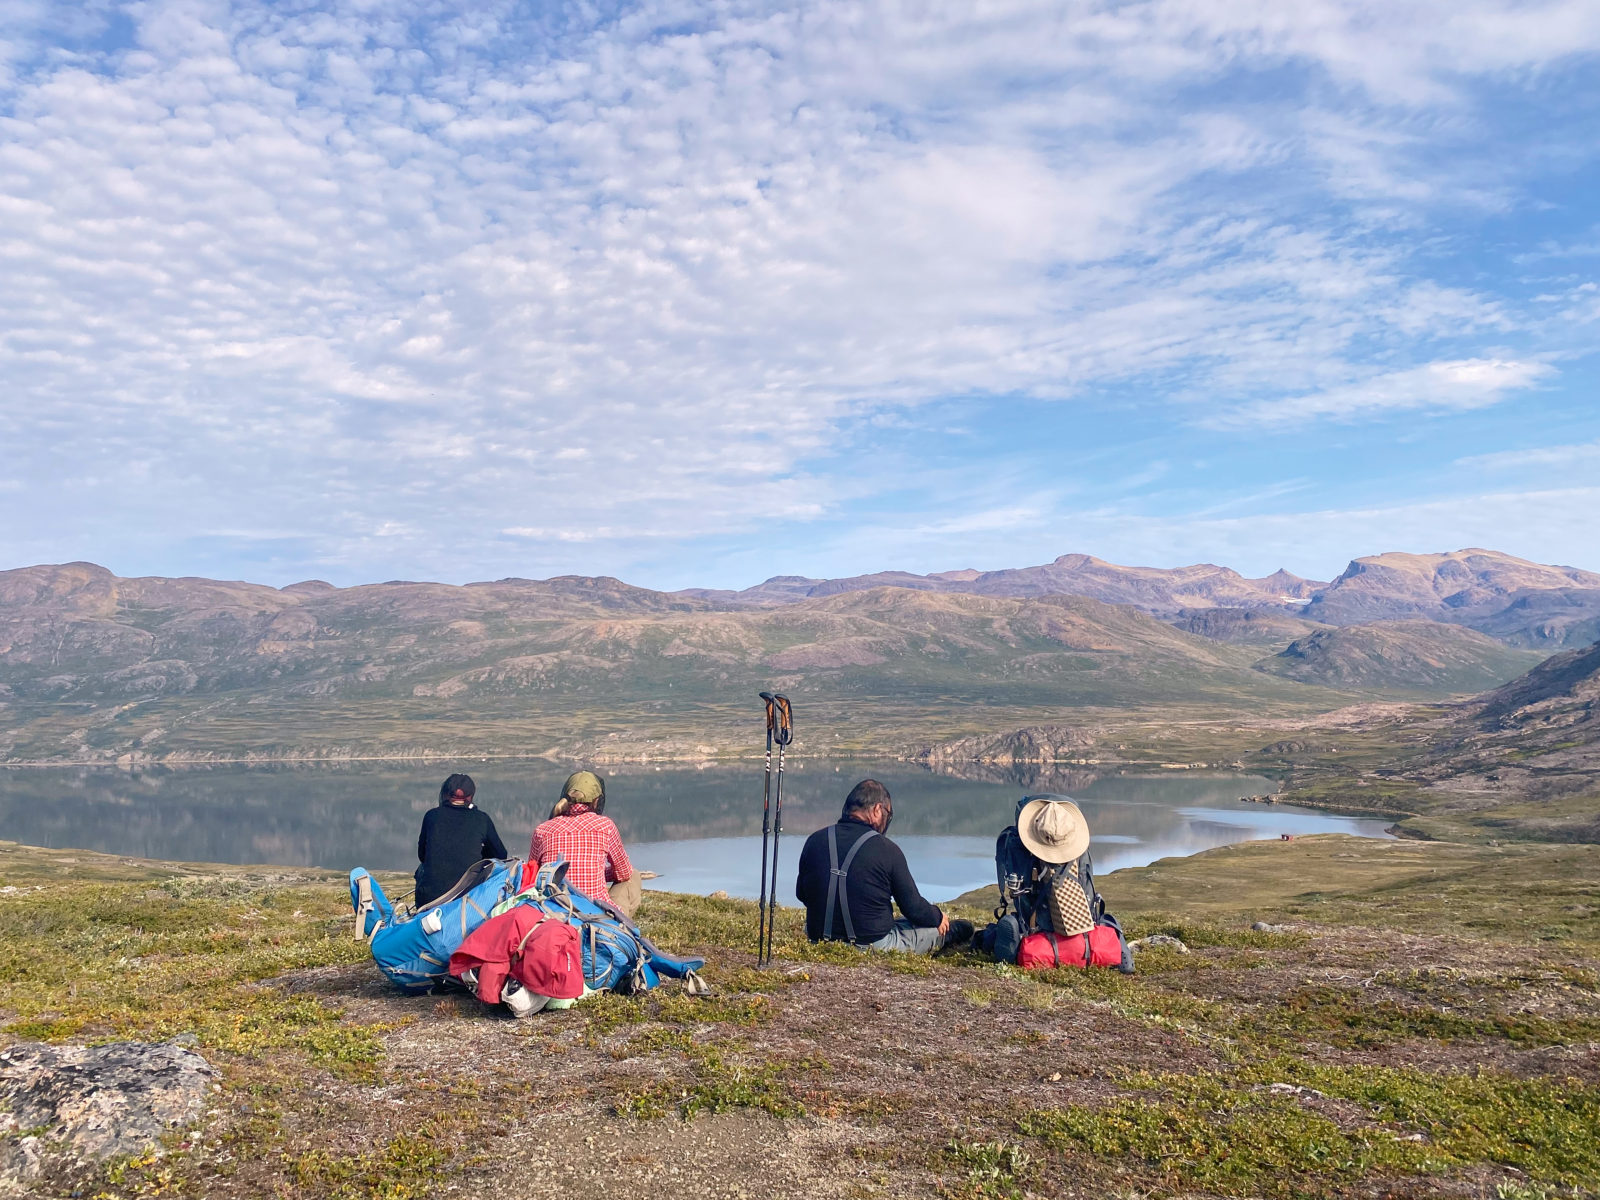 lunch stop overlooking a lake on the arctic circle trail. Please respect Leave No Trace principals and carry your rubbish out with you